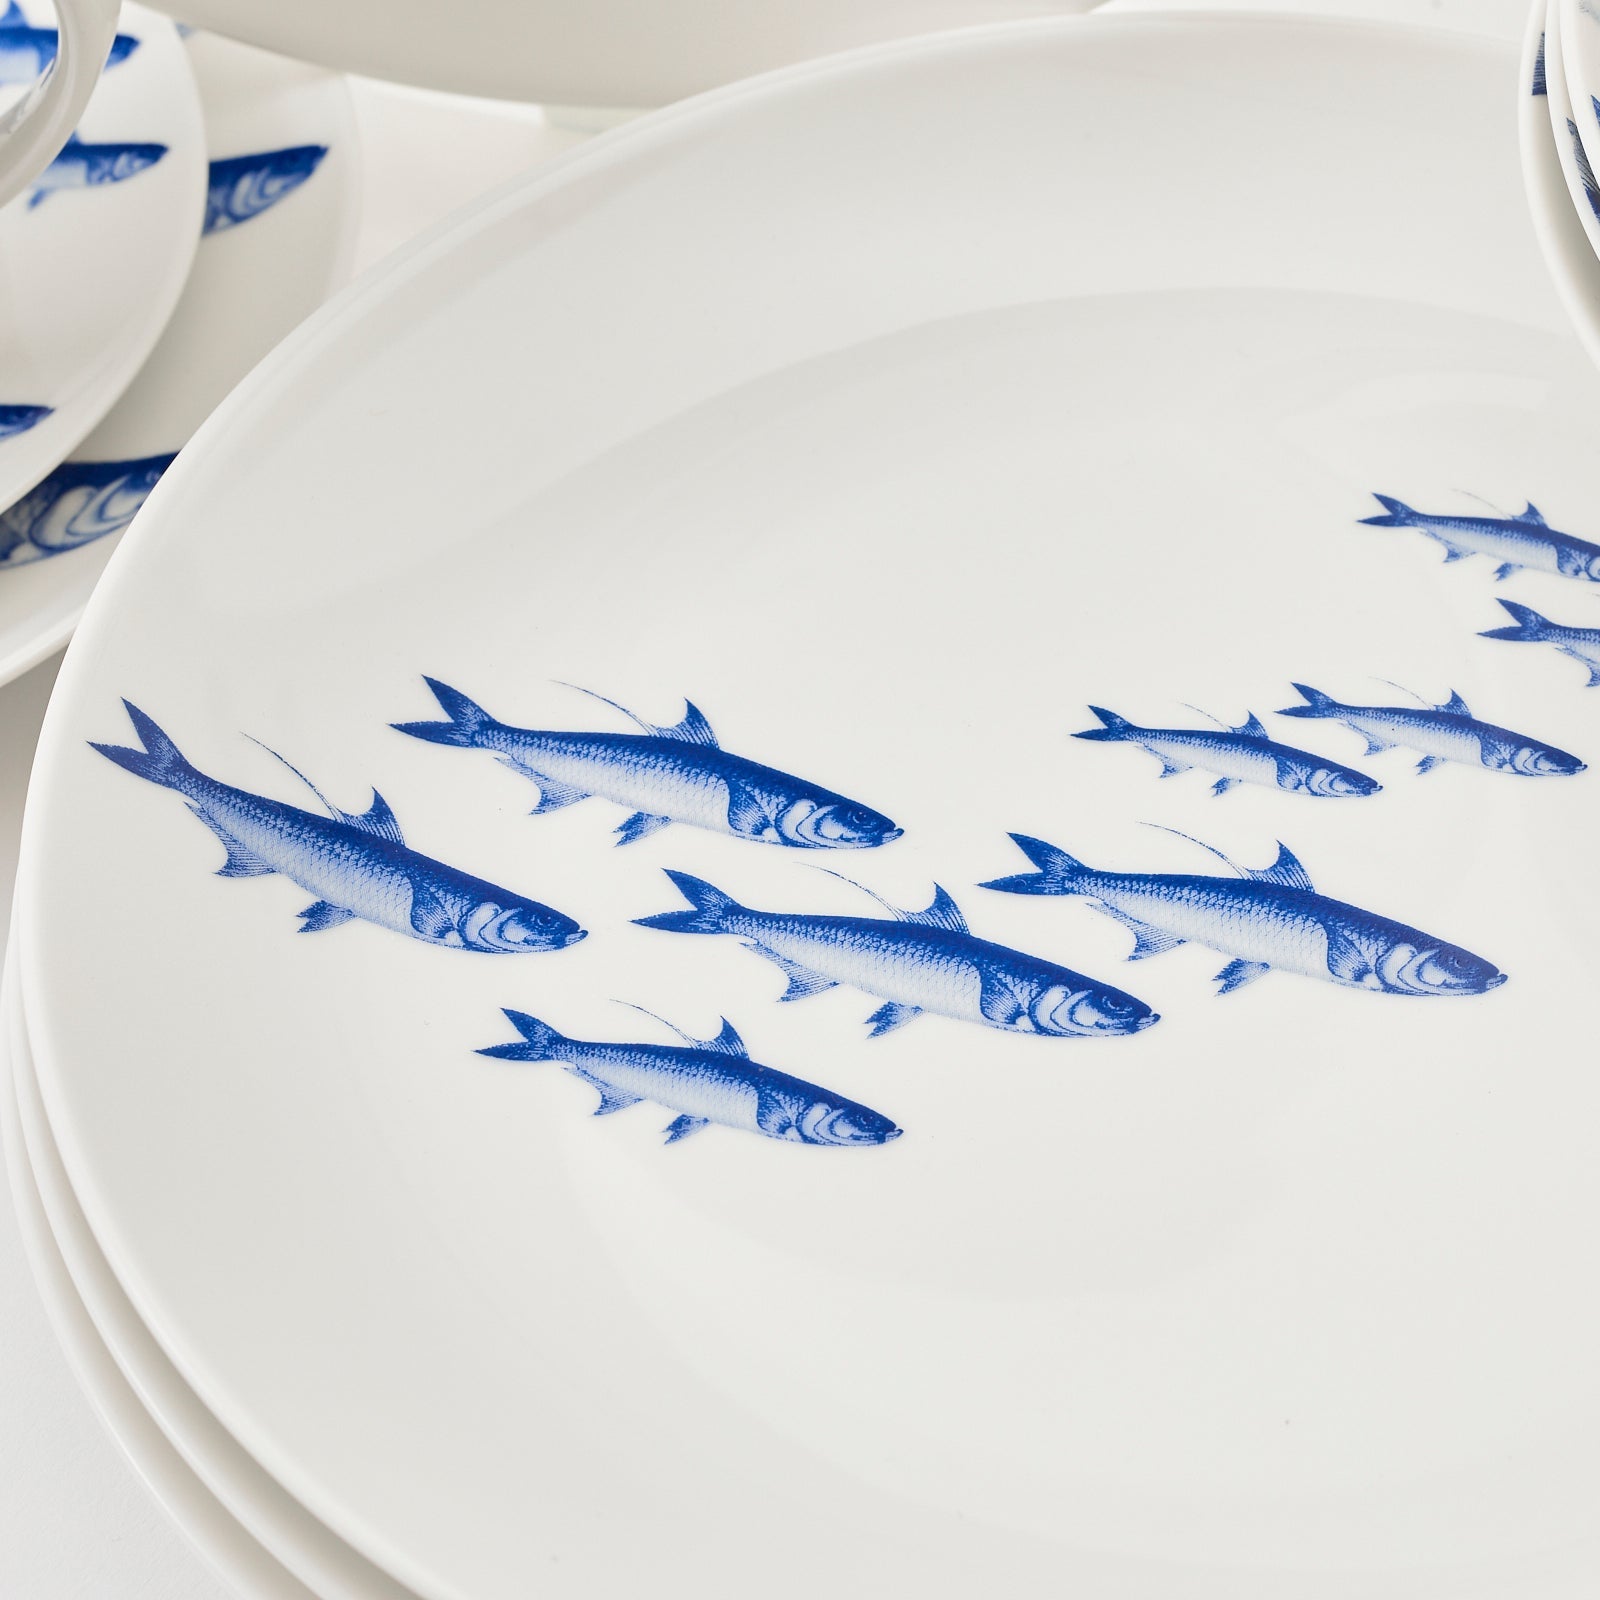 School of Fish 16 piece dinnerware set in blue and white porcelain from Caskata